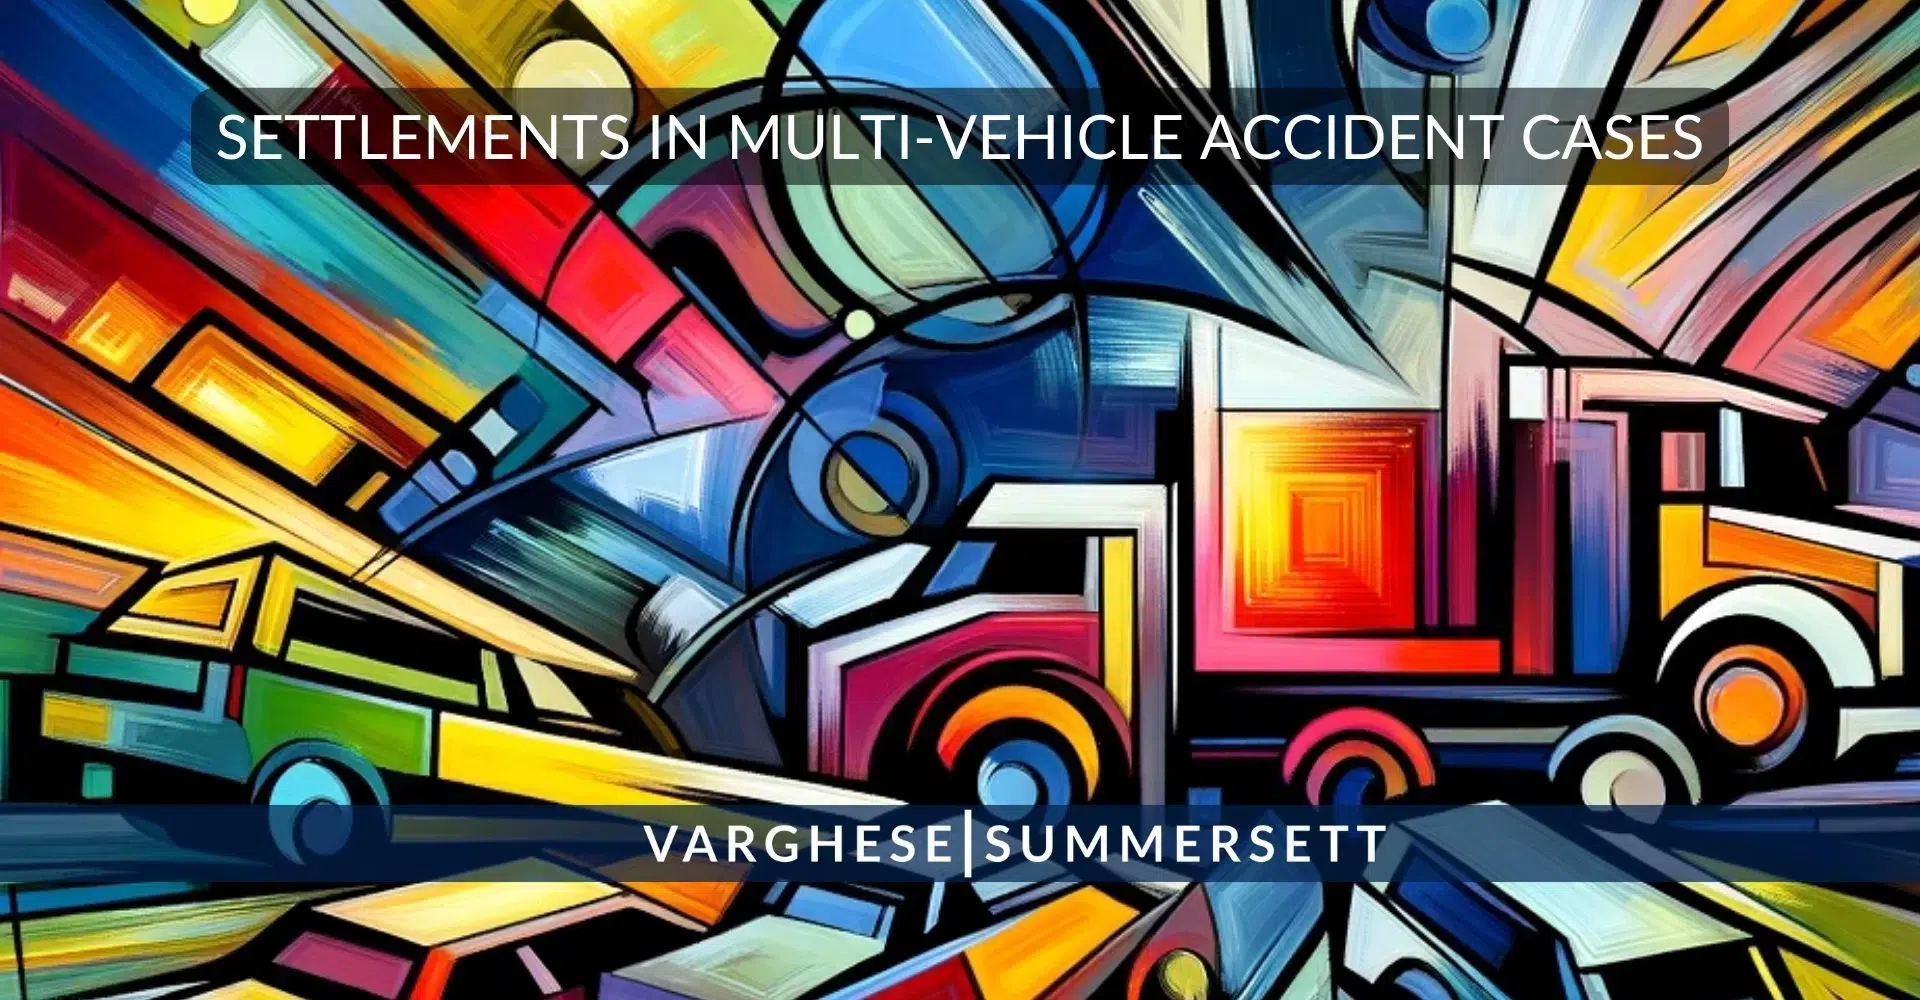 SETTLEMENTS IN MULTI-VEHICLE ACCIDENT CASES